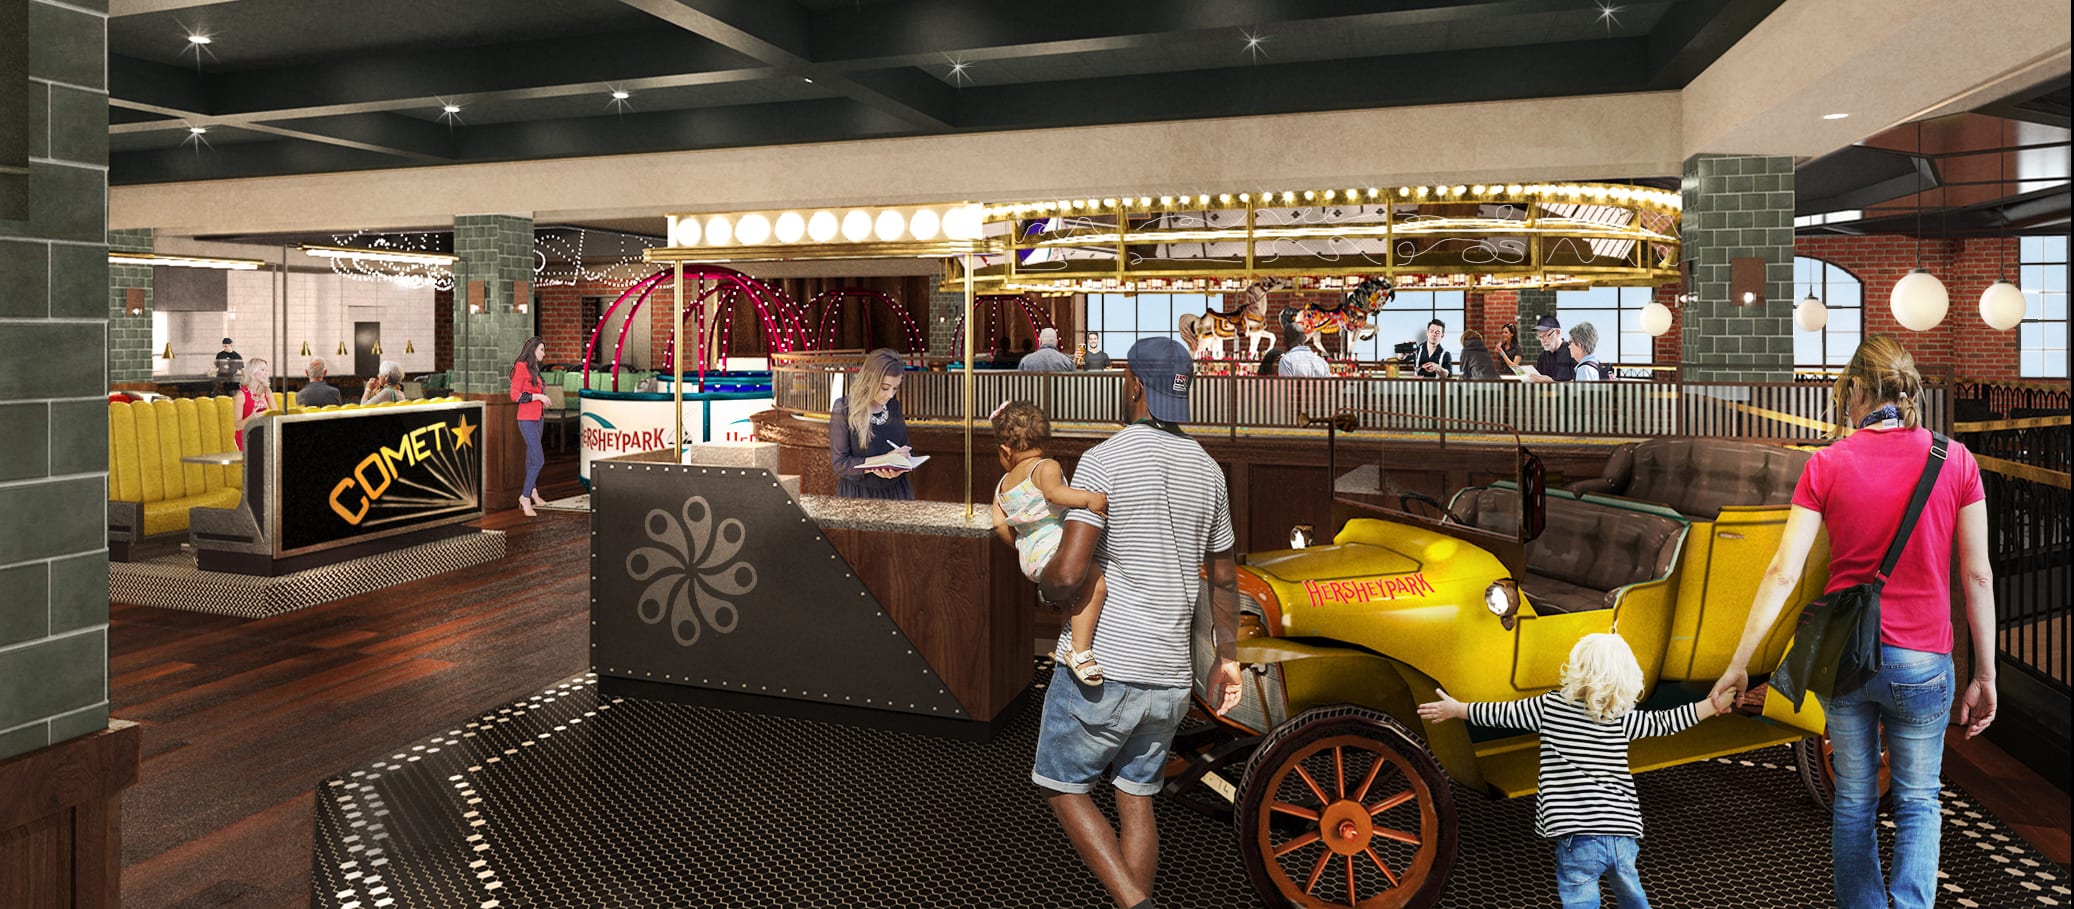 New At Hersheypark In 2021